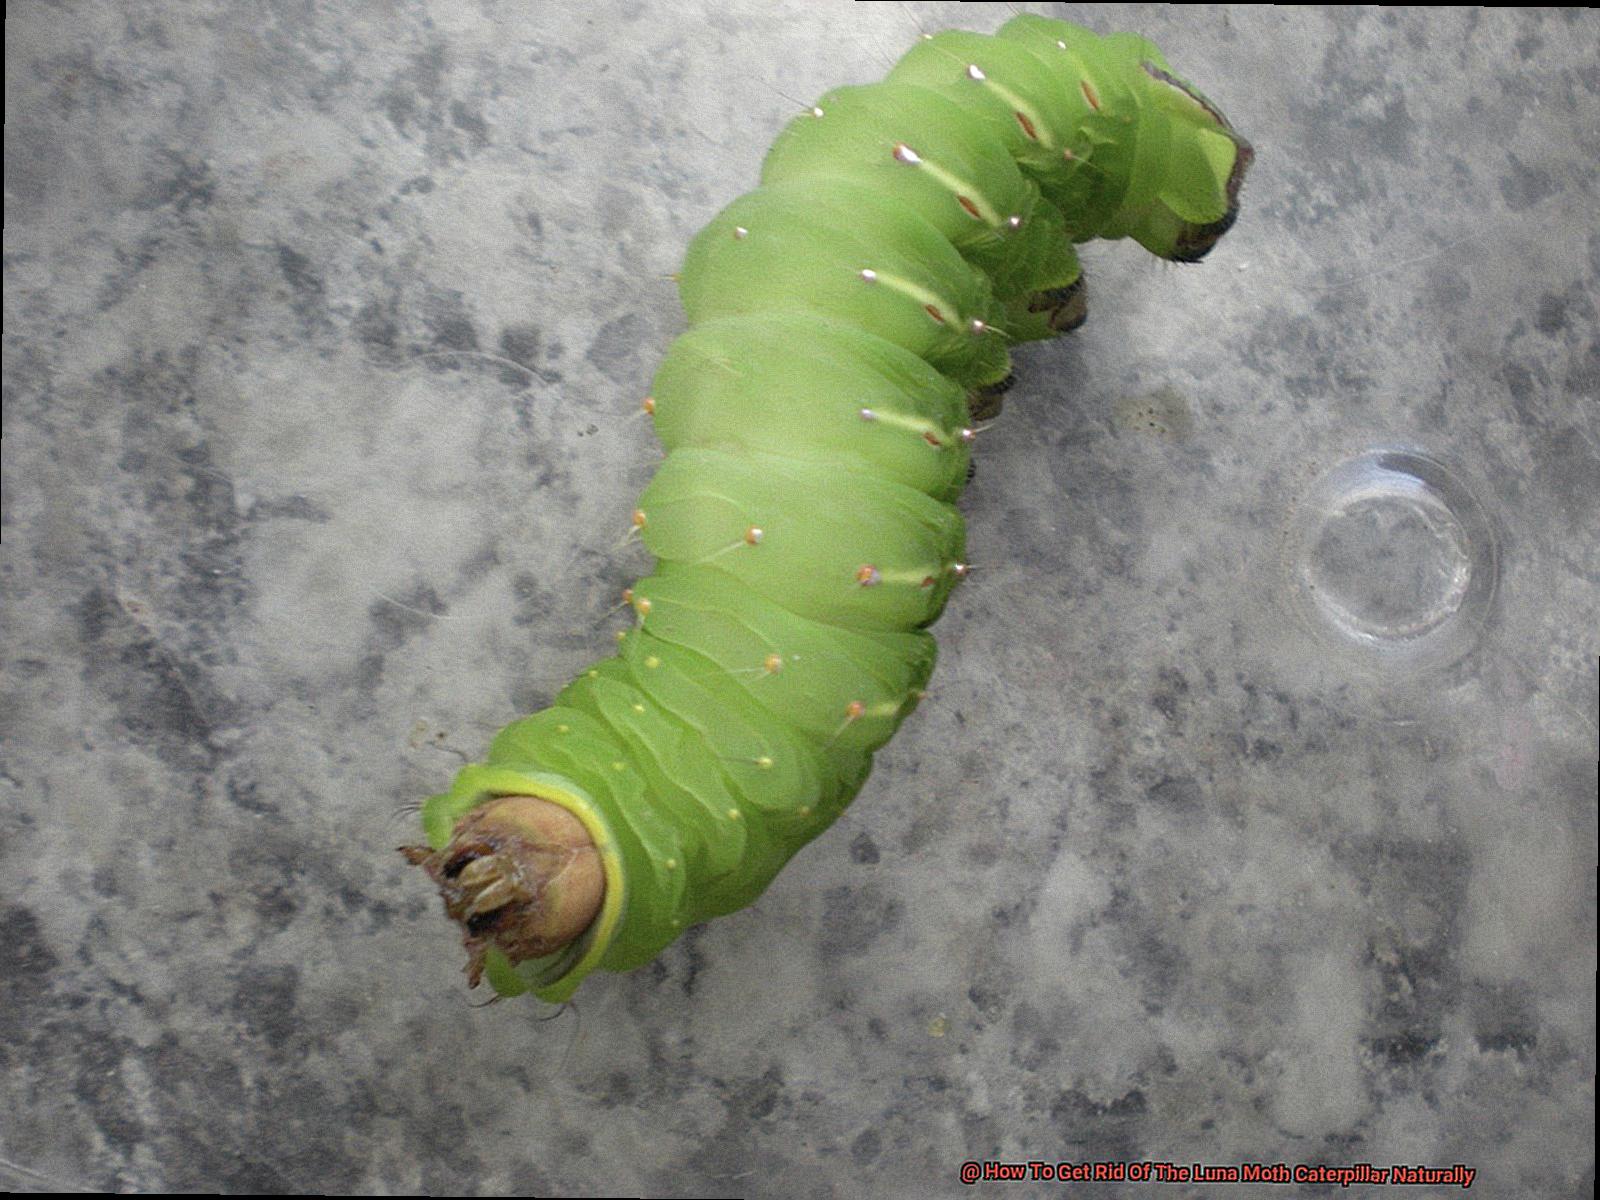 How To Get Rid Of The Luna Moth Caterpillar Naturally-5